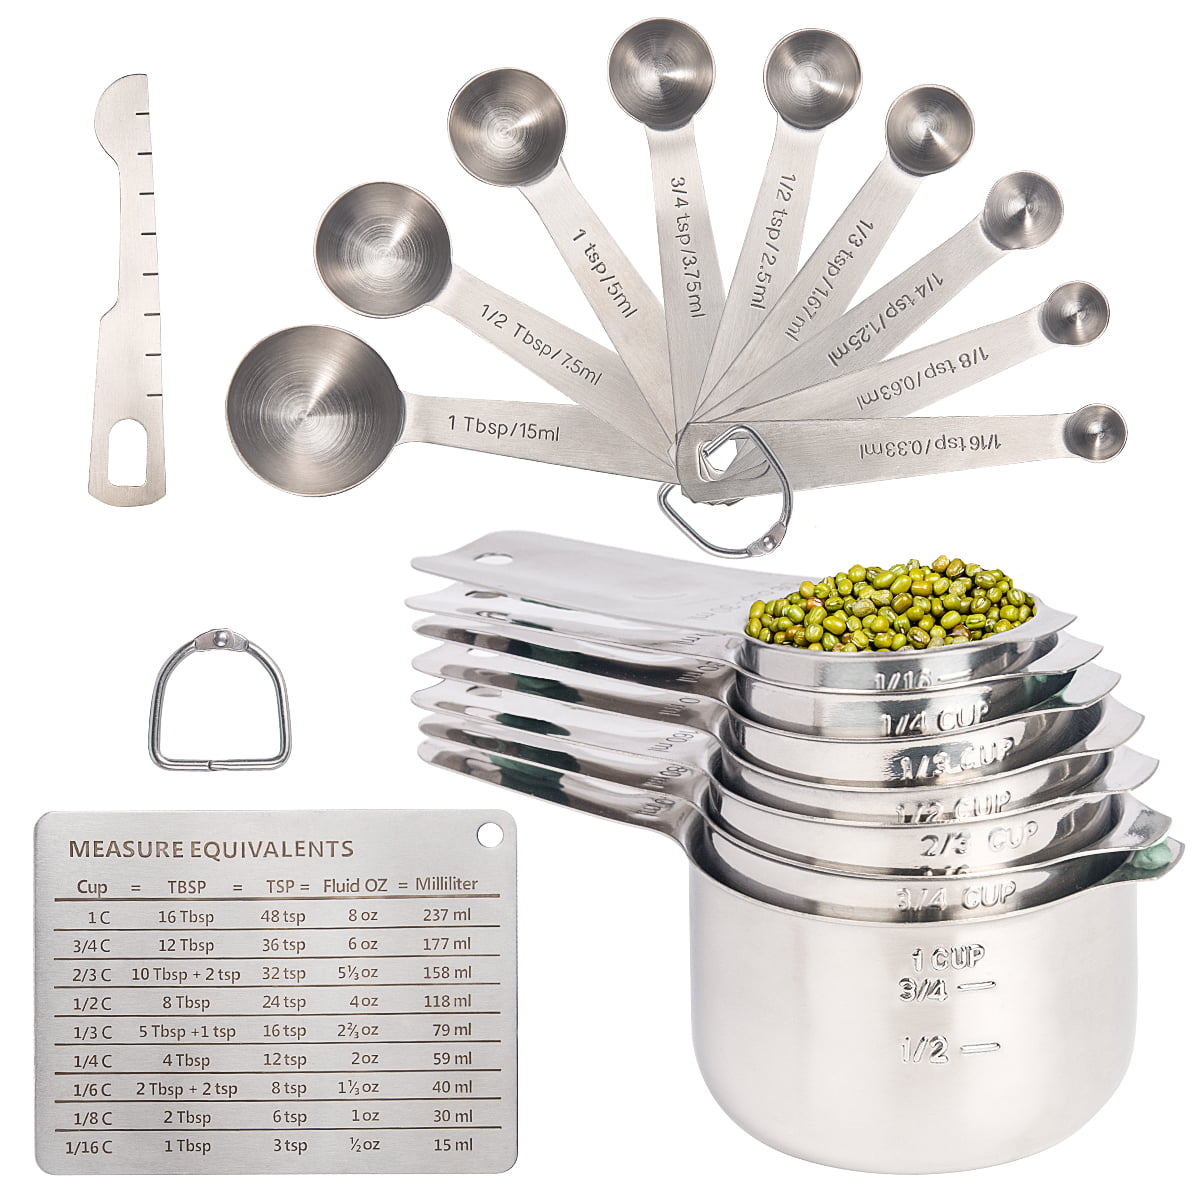 Gray Measuring Cups and Measuring Spoons 8 Piece Set of Plastic Measuring Cup and Spoon Set with Stainless Steel Handles,